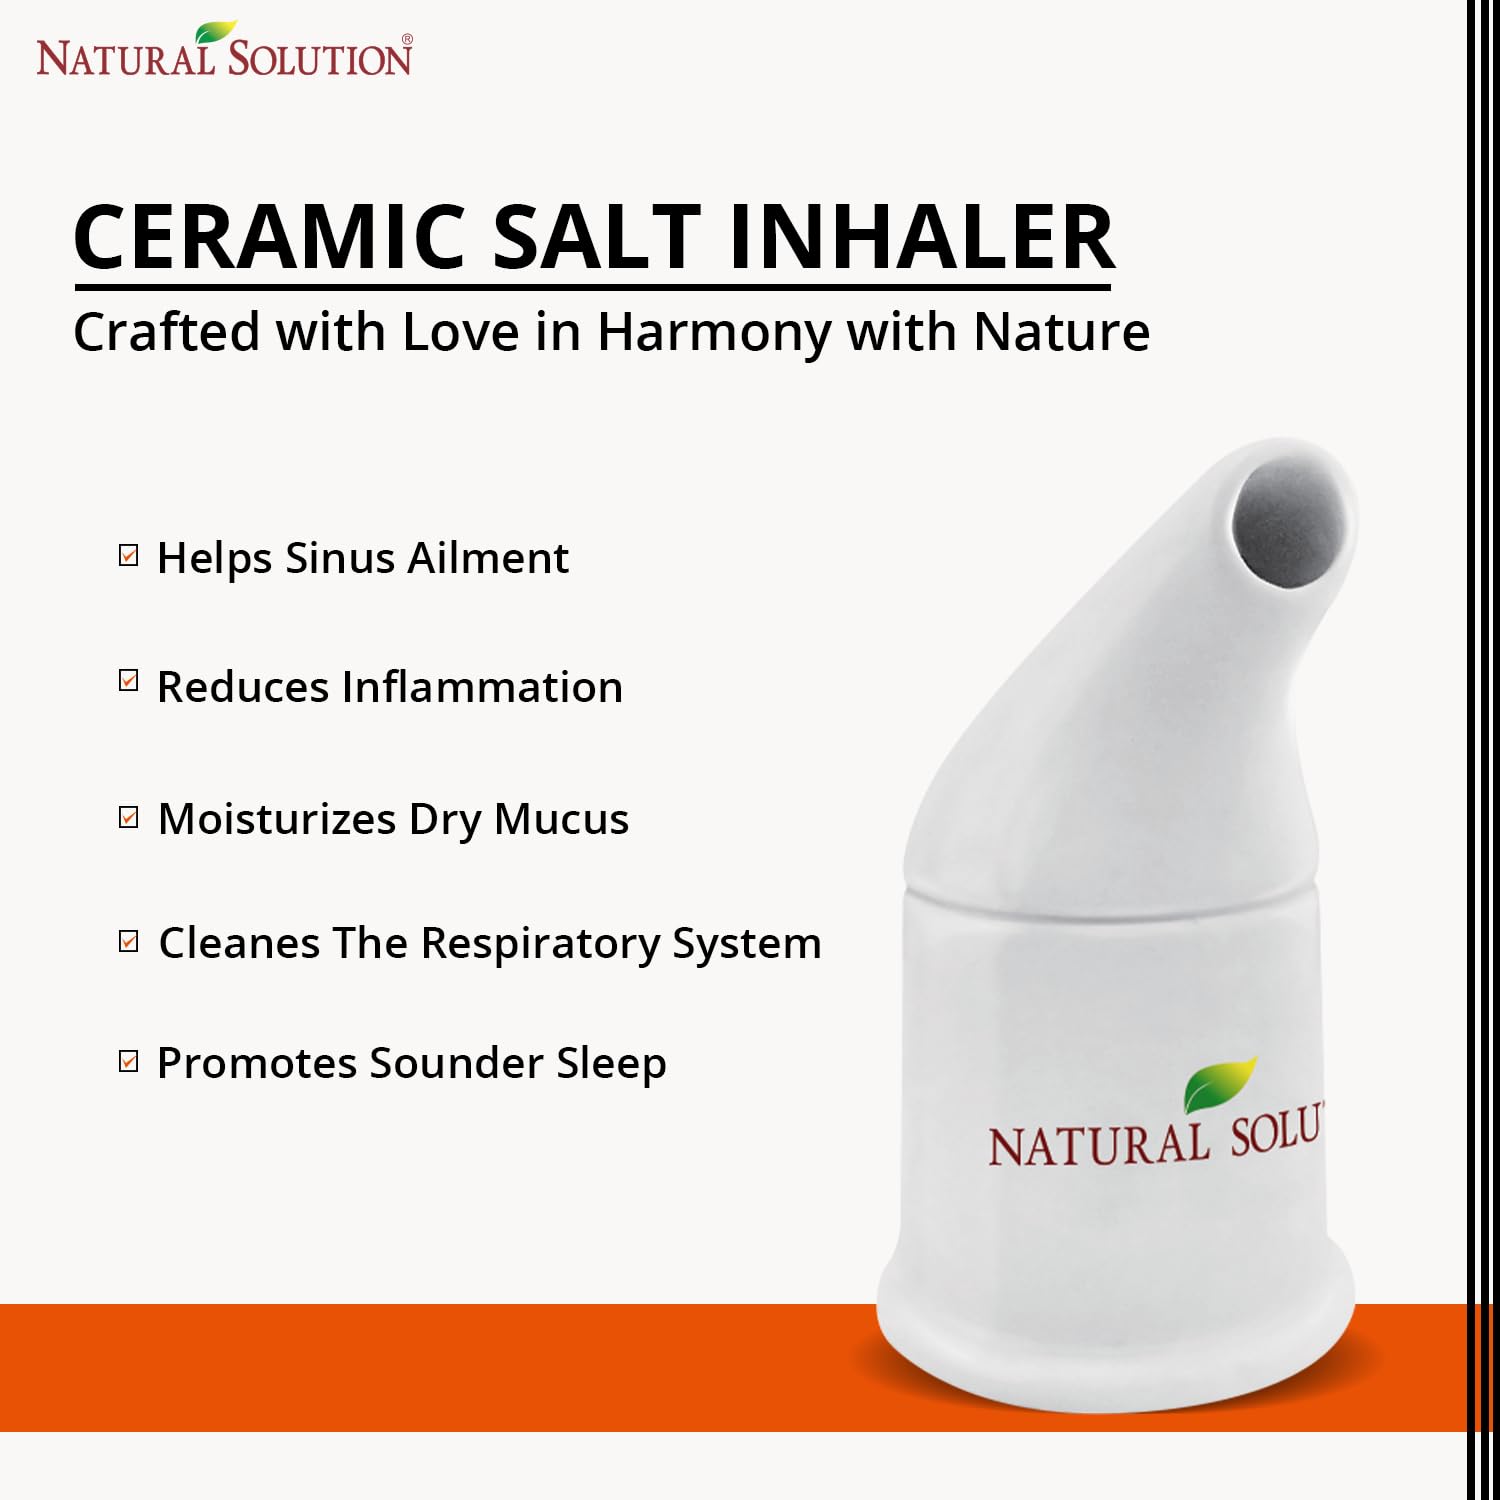 Natural Solution Ceramic Pink, Cleans The Respiratory System Great for Allergy, Asthma Relief, and Other Respiratory Conditions , Salt Inhaler, 1 Count